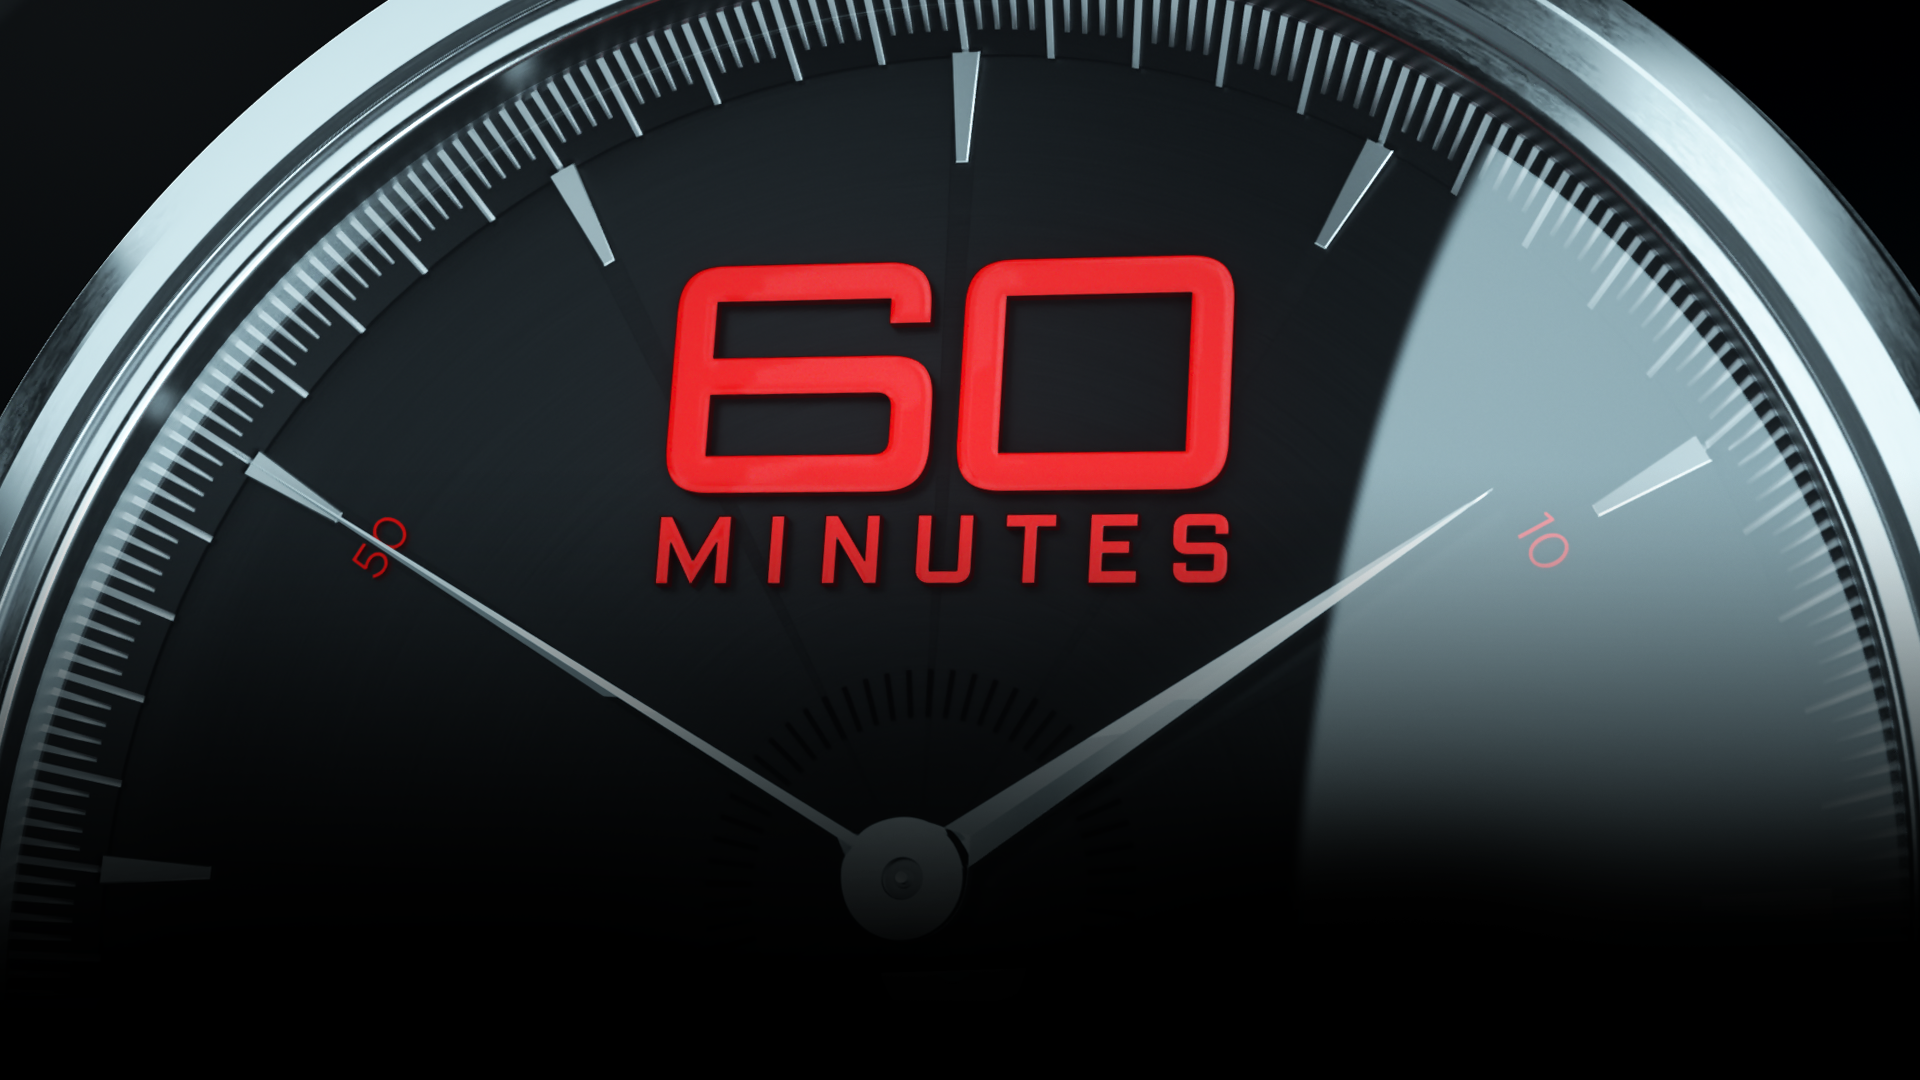 Watch 60 Minutes live or ondemand Freeview Australia